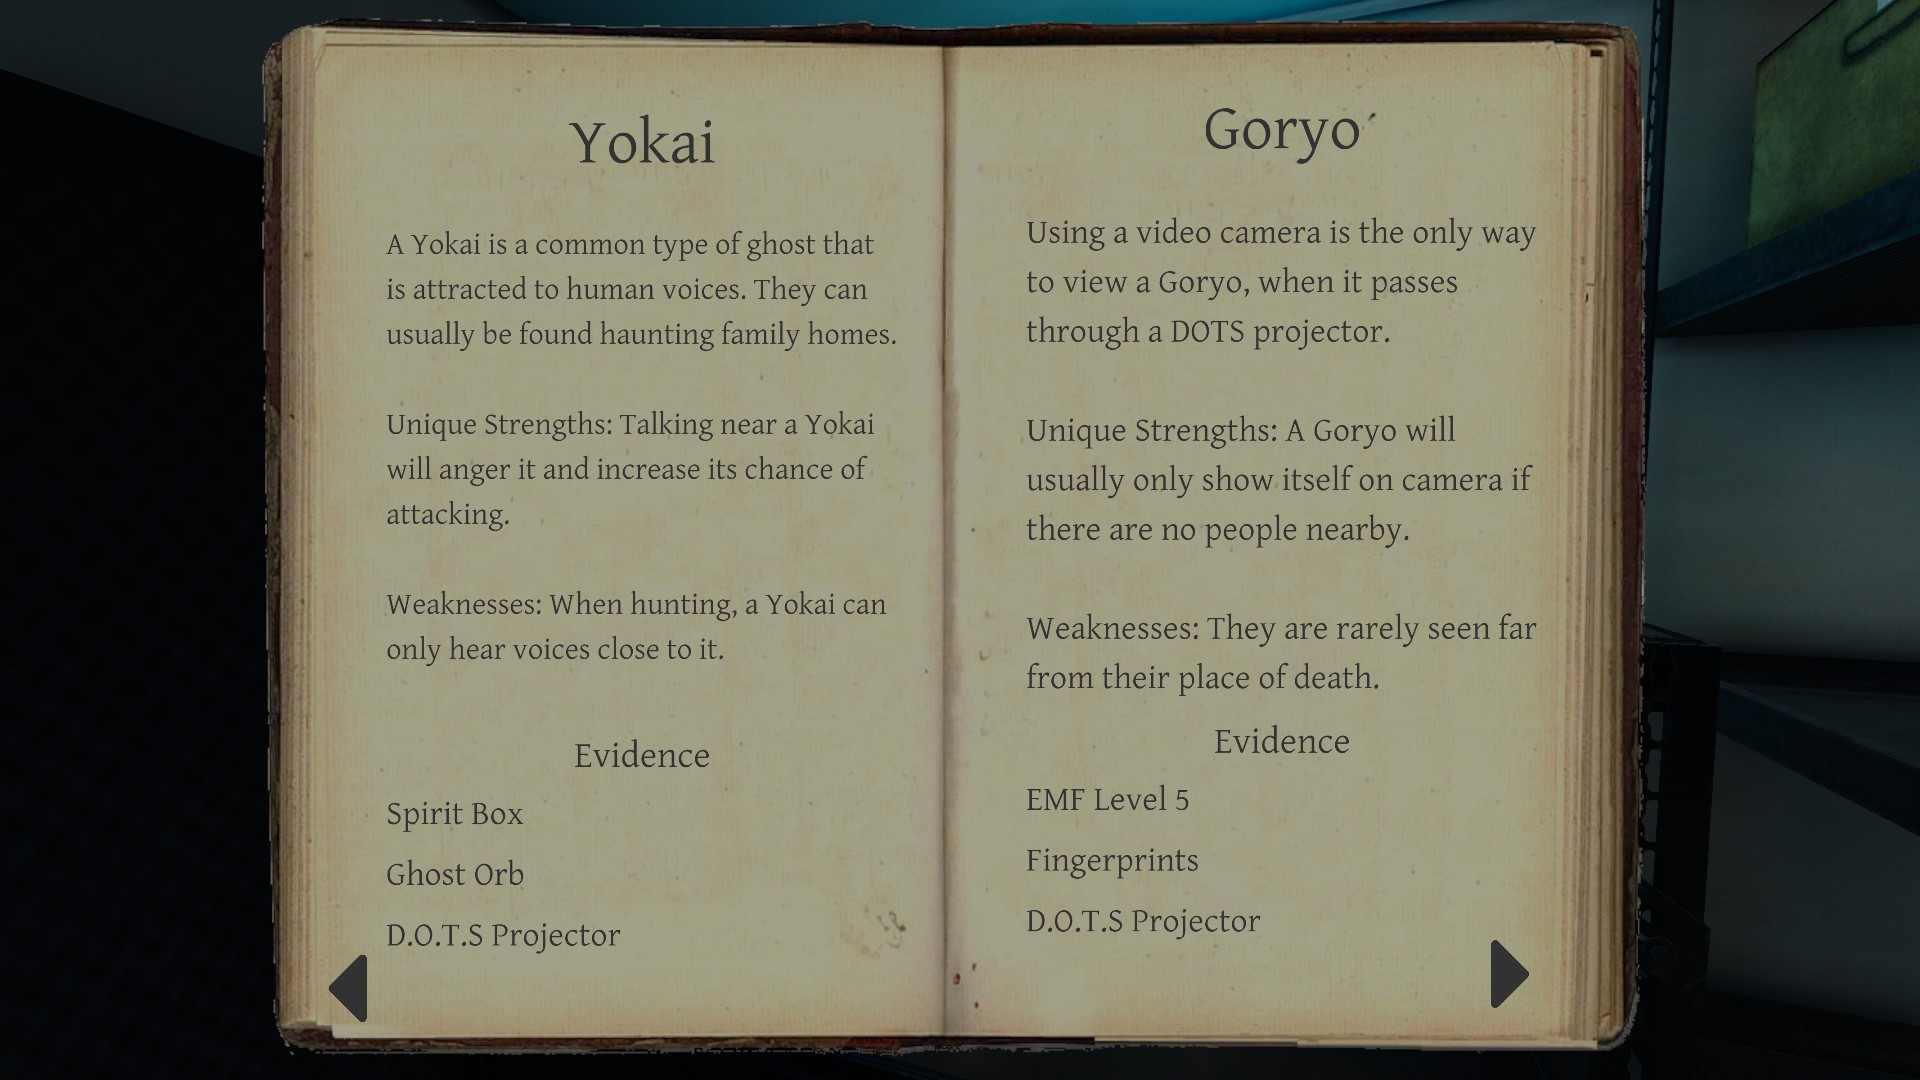 Phasmophobia List of New Ghosts in Game - All Evidence and Questions for Ghost Guide - Yokai - Goryo - 4A430CE